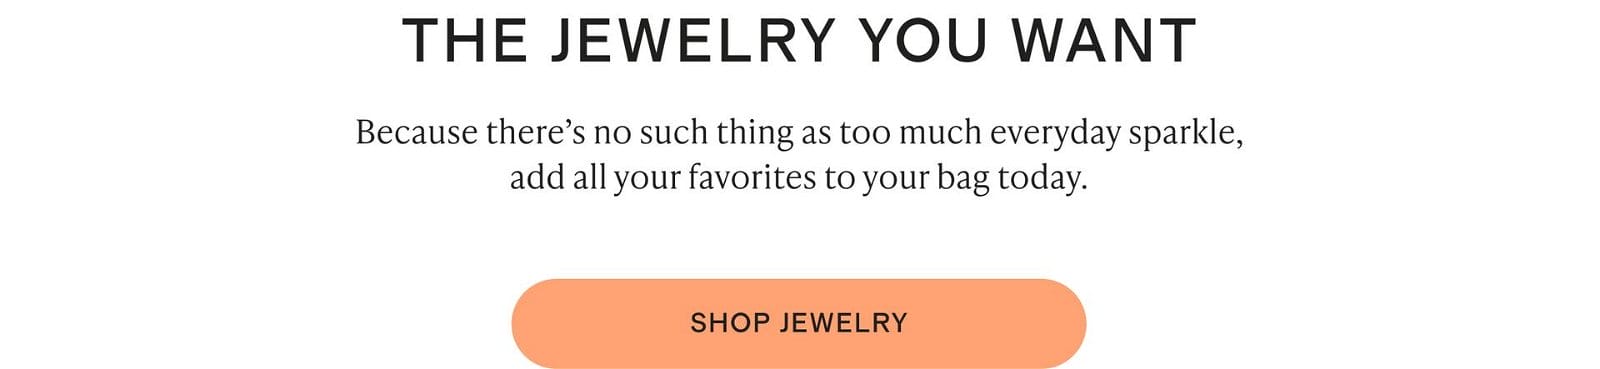 The jewelry you want